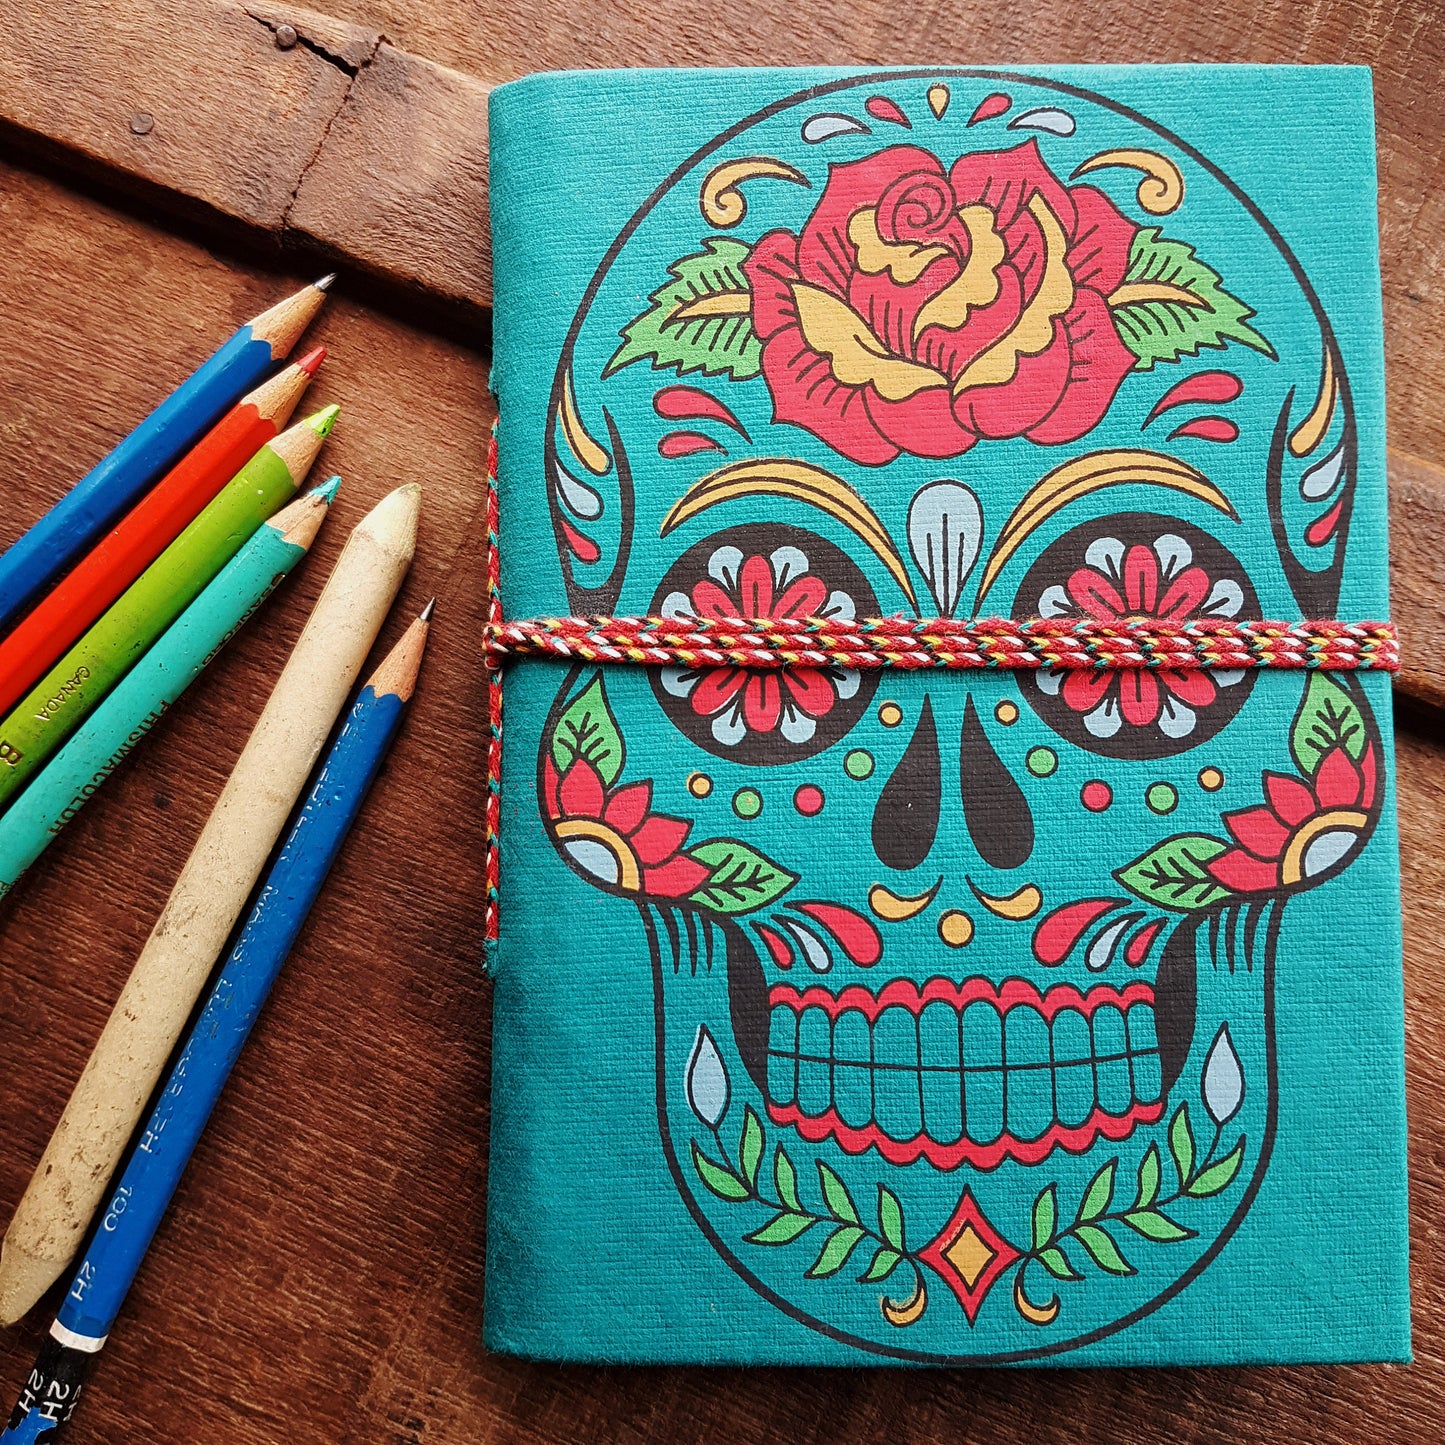 Teal skull sketchbook jotter 5 by 7 inches with blank artisan paper pages. Colorful gothic day of the dead sugarskull design diary in teal. - Vintage India Ca